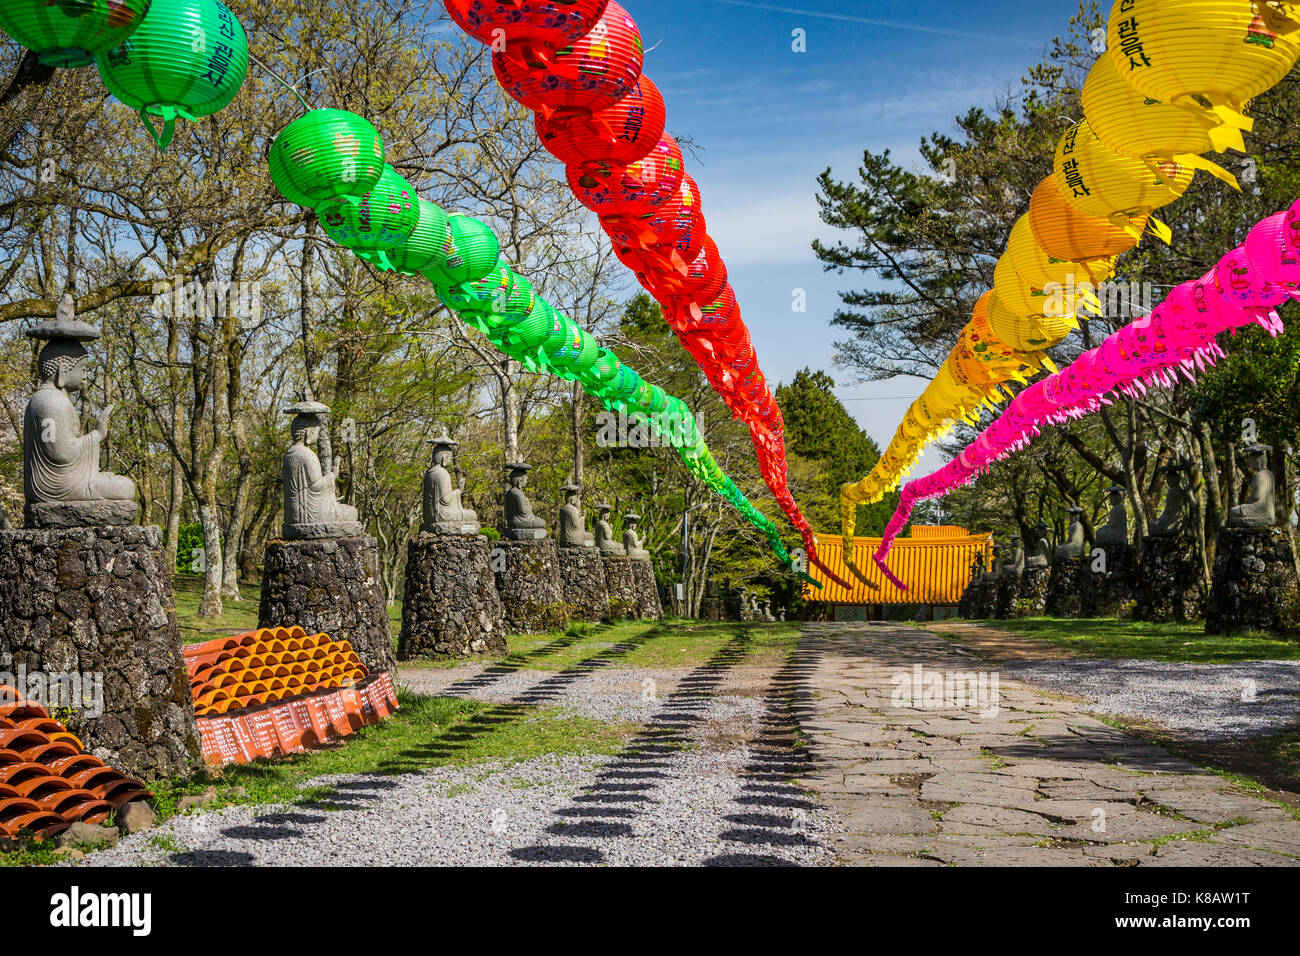 The entrance to the Gwaneumsa Temple with colorful lanerns at the foot of Mt. Halla in Ara-dong in Jeju City, Jeju Island, South Korea, Asia. Stock Photo